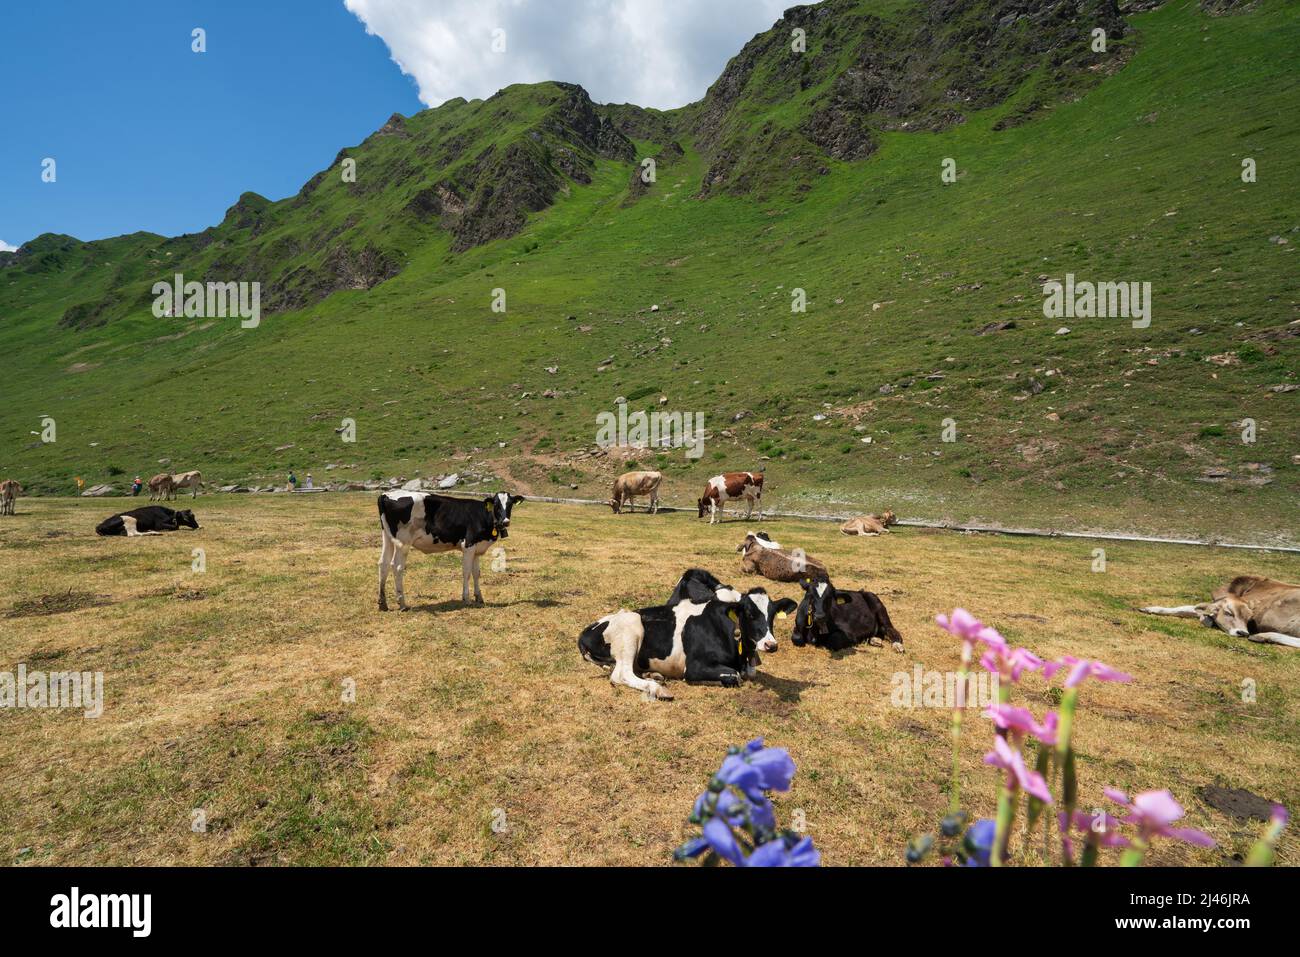 Cows by the lake Ritom, south Switzerland Stock Photo